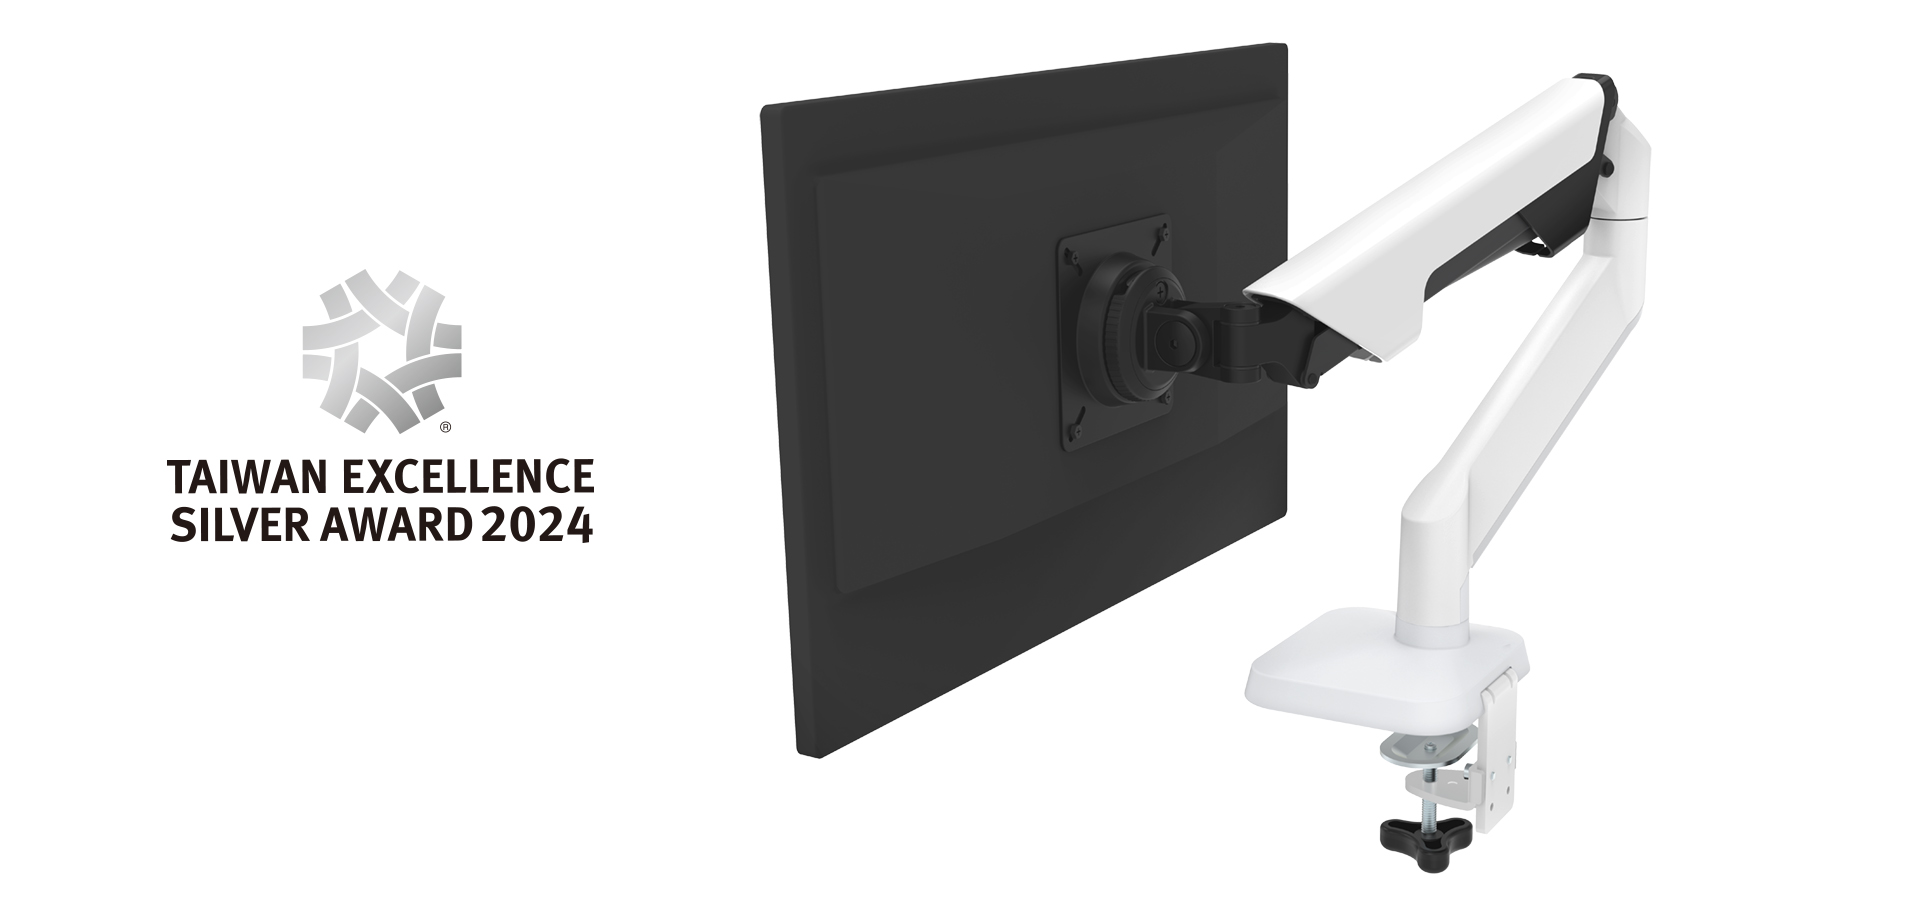 Modernsolid's Ares Monitor Arm Wins awarded the 2024 Taiwan Excellence Silver Awards